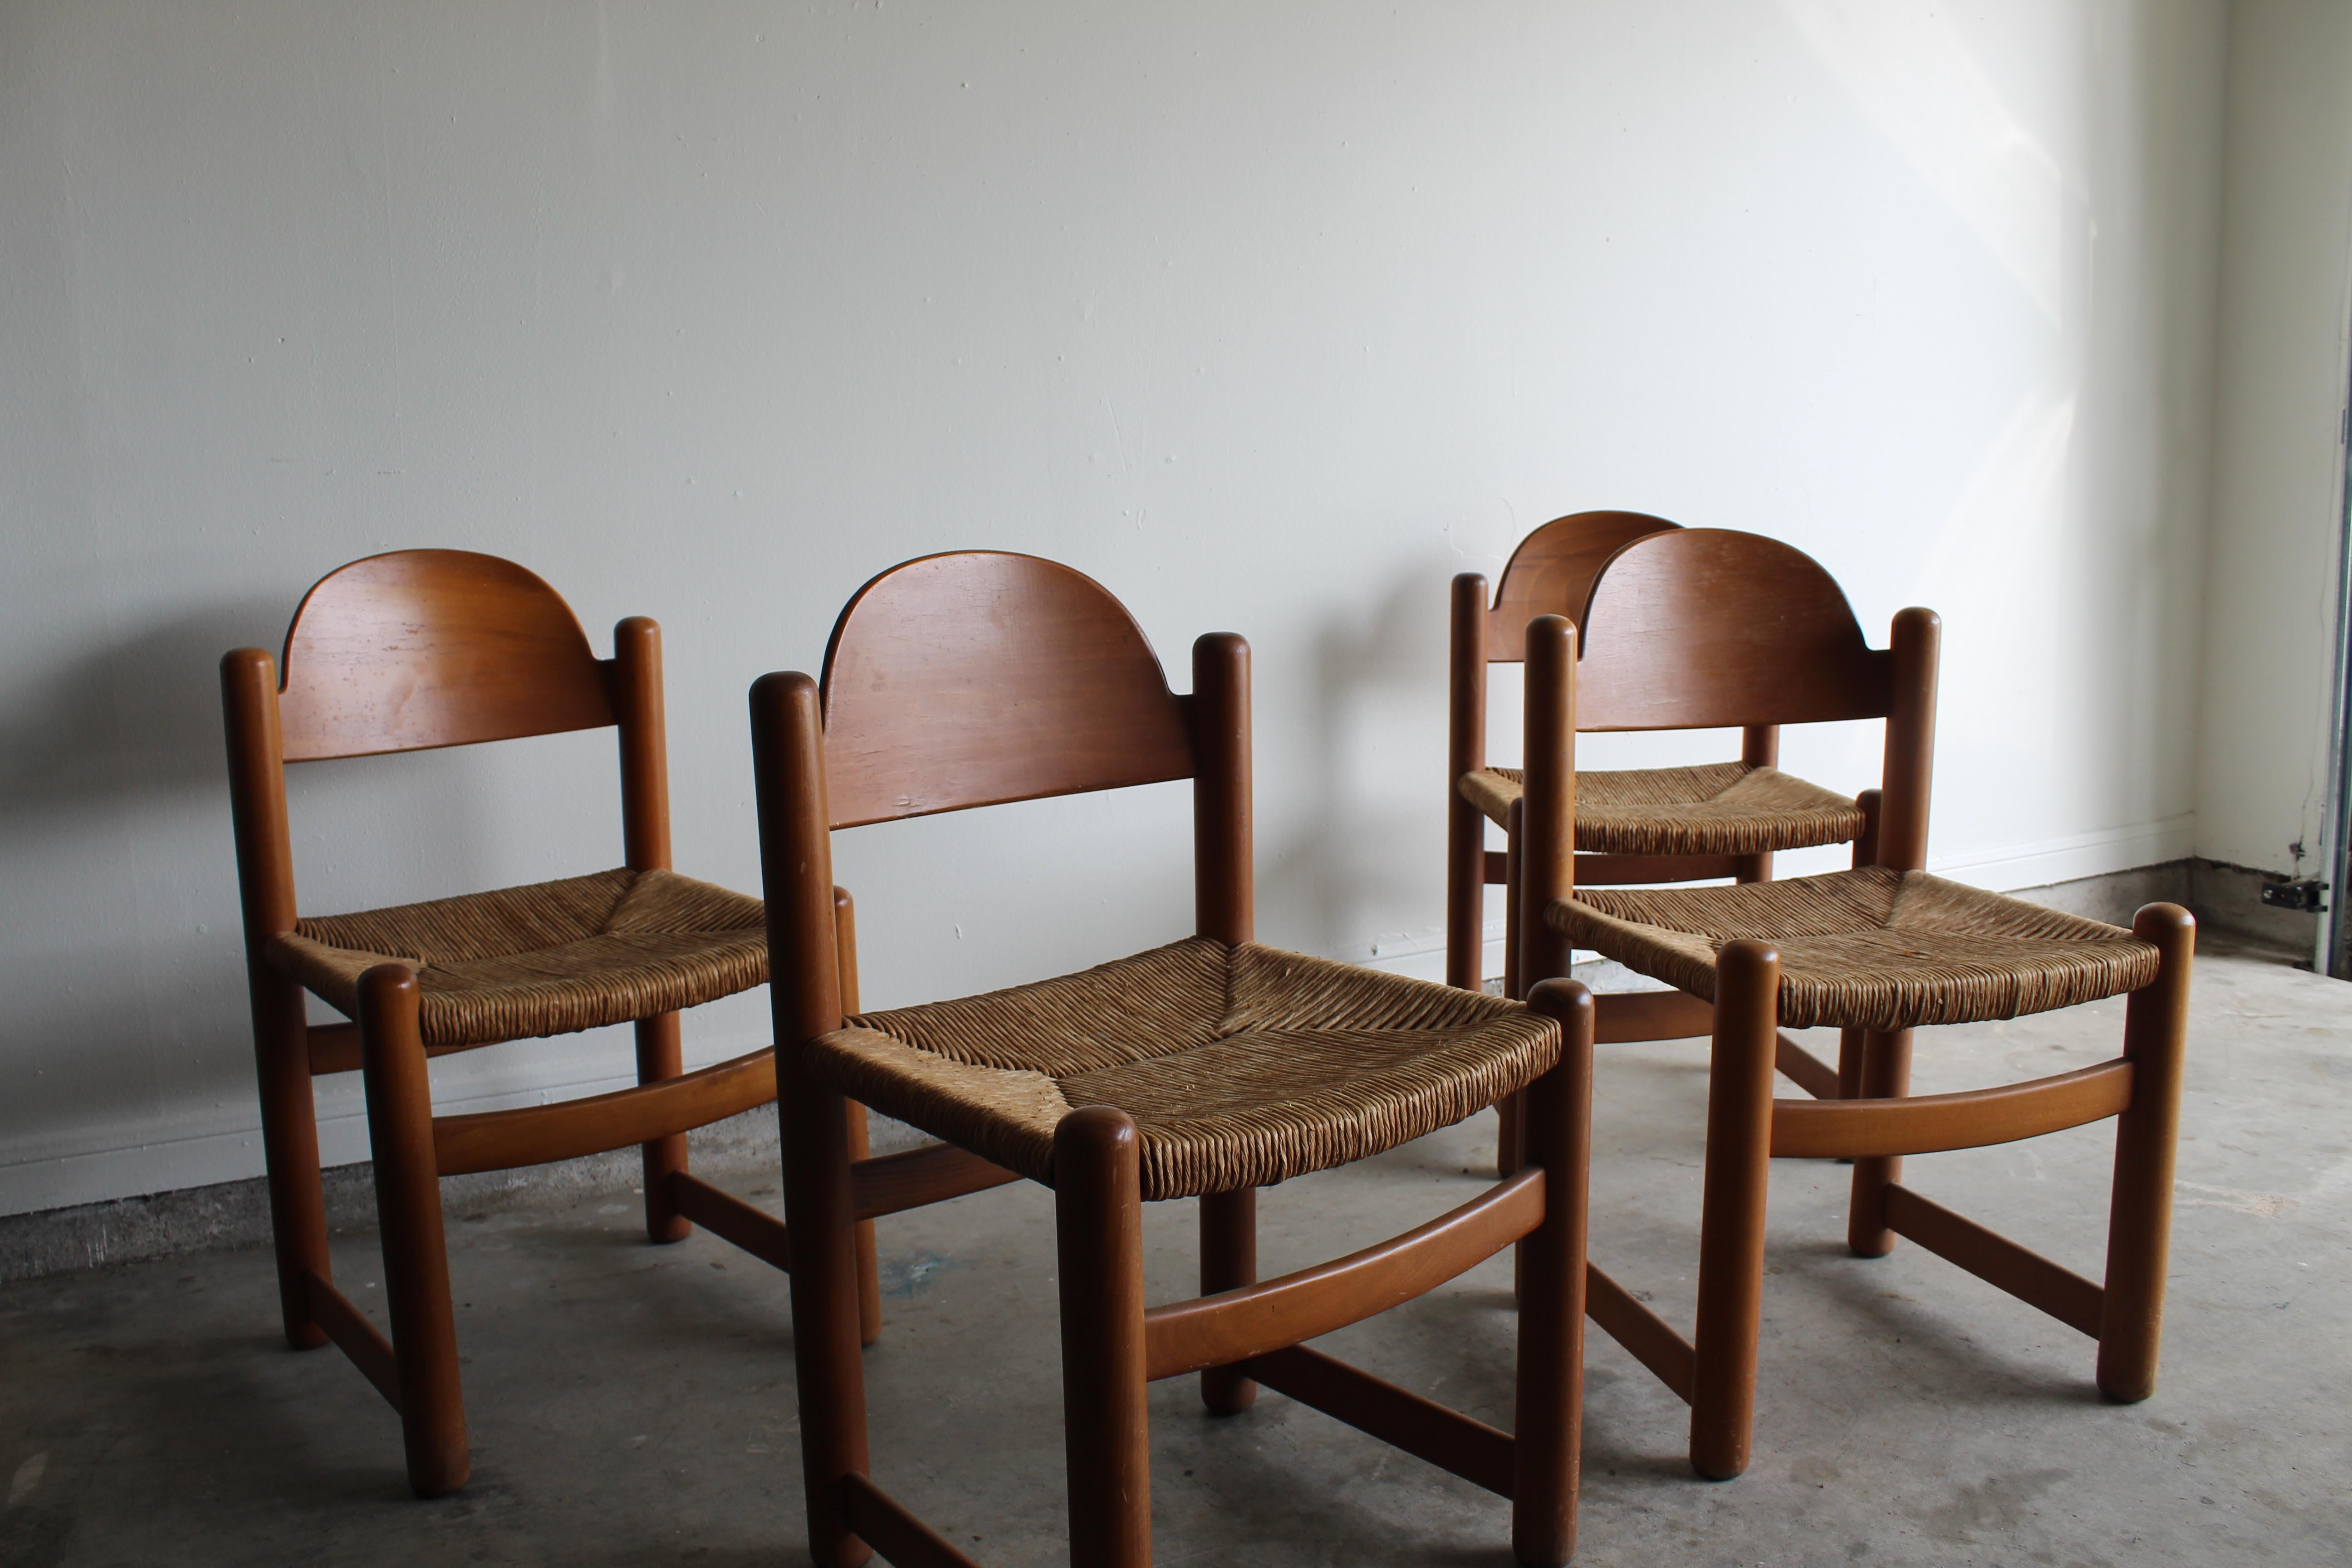 Stunning set of 4 Hank Lowenstein’s “Padova” dining chairs in oak wood with rush seats. Boasting a dark wood stain and beautiful rounded edges.